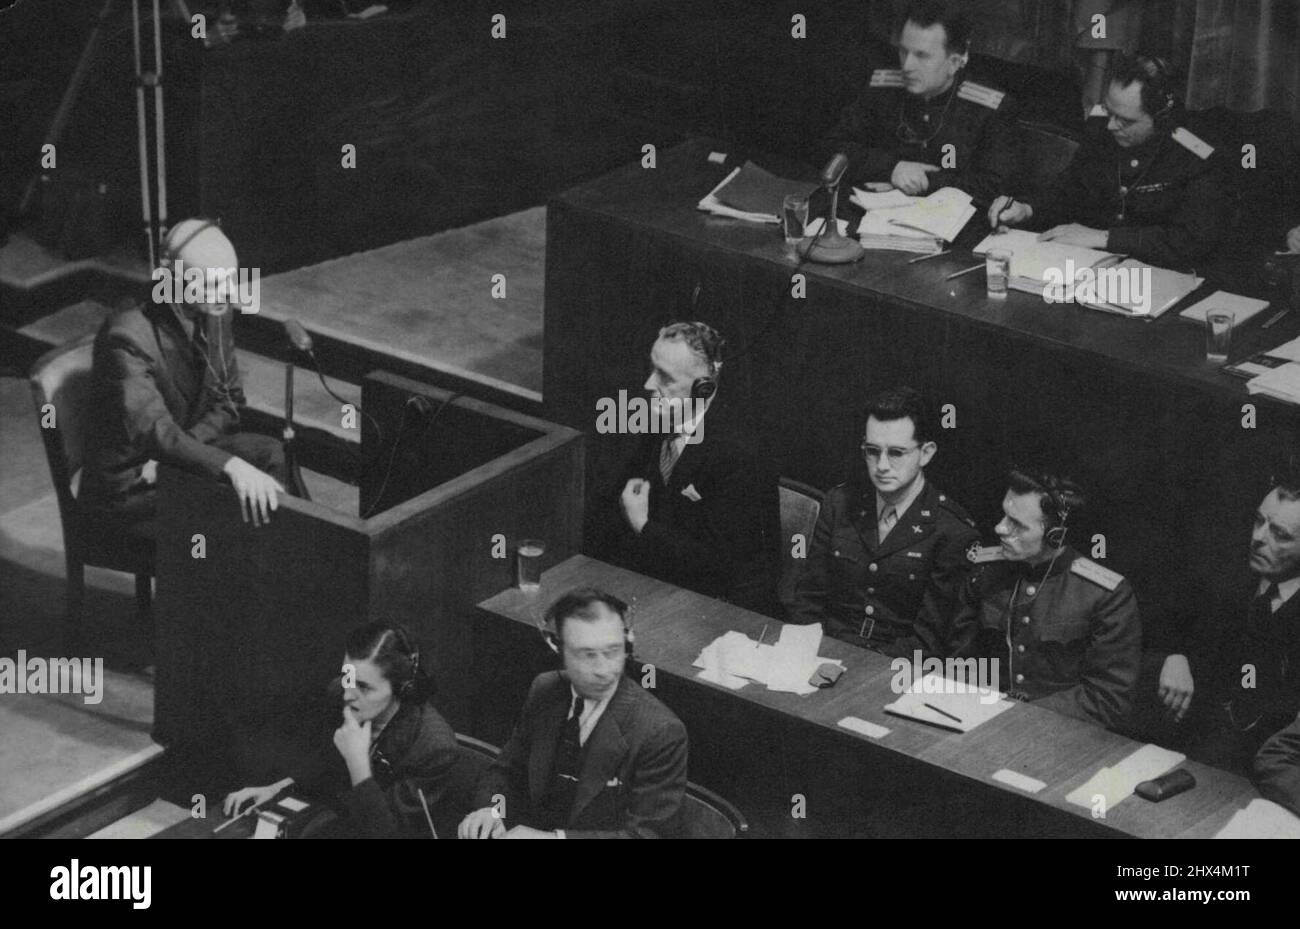 Man They Forgot: Nazi Spy Chief Gives Evidence At Nurnberg -- A General view as General Erwin Lhousen (seated left) gave his evidence before the Tribunal at Nuremberg today November 30.General Erwin Lahousen, Deputy to Admiral Canaris, chief of German intelligence from 1938 to 1943 was the prosecutions first witness at the trial of major war criminals in the palace of justice, Nuremberg today November 30. During the Lunch adjournment the accused men raved. Coerins shouted: 'Traitor - That's one man we forgot on July 20th, declaring that he was going to try and get into the Witness - box himsel Stock Photo